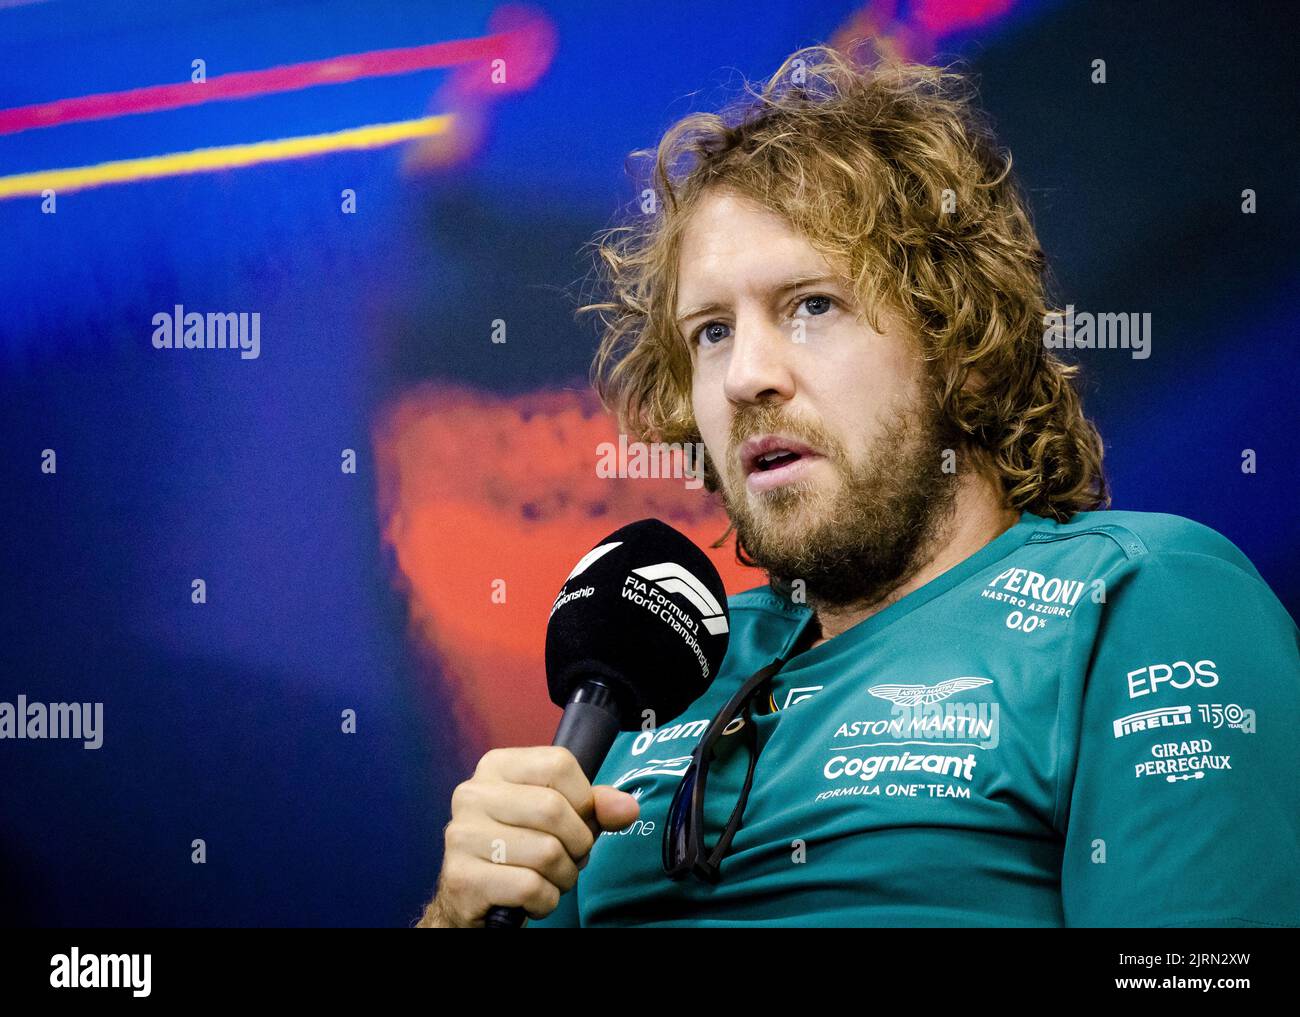 2022-08-25 15:48:40 SPA - Sebastian Vettel (Aston Martin) during a press conference at the Spa-Francrochamps race track in the run-up to the Belgian Grand Prix. ANP SEM VAN DER WAL netherlands out - belgium out Stock Photo